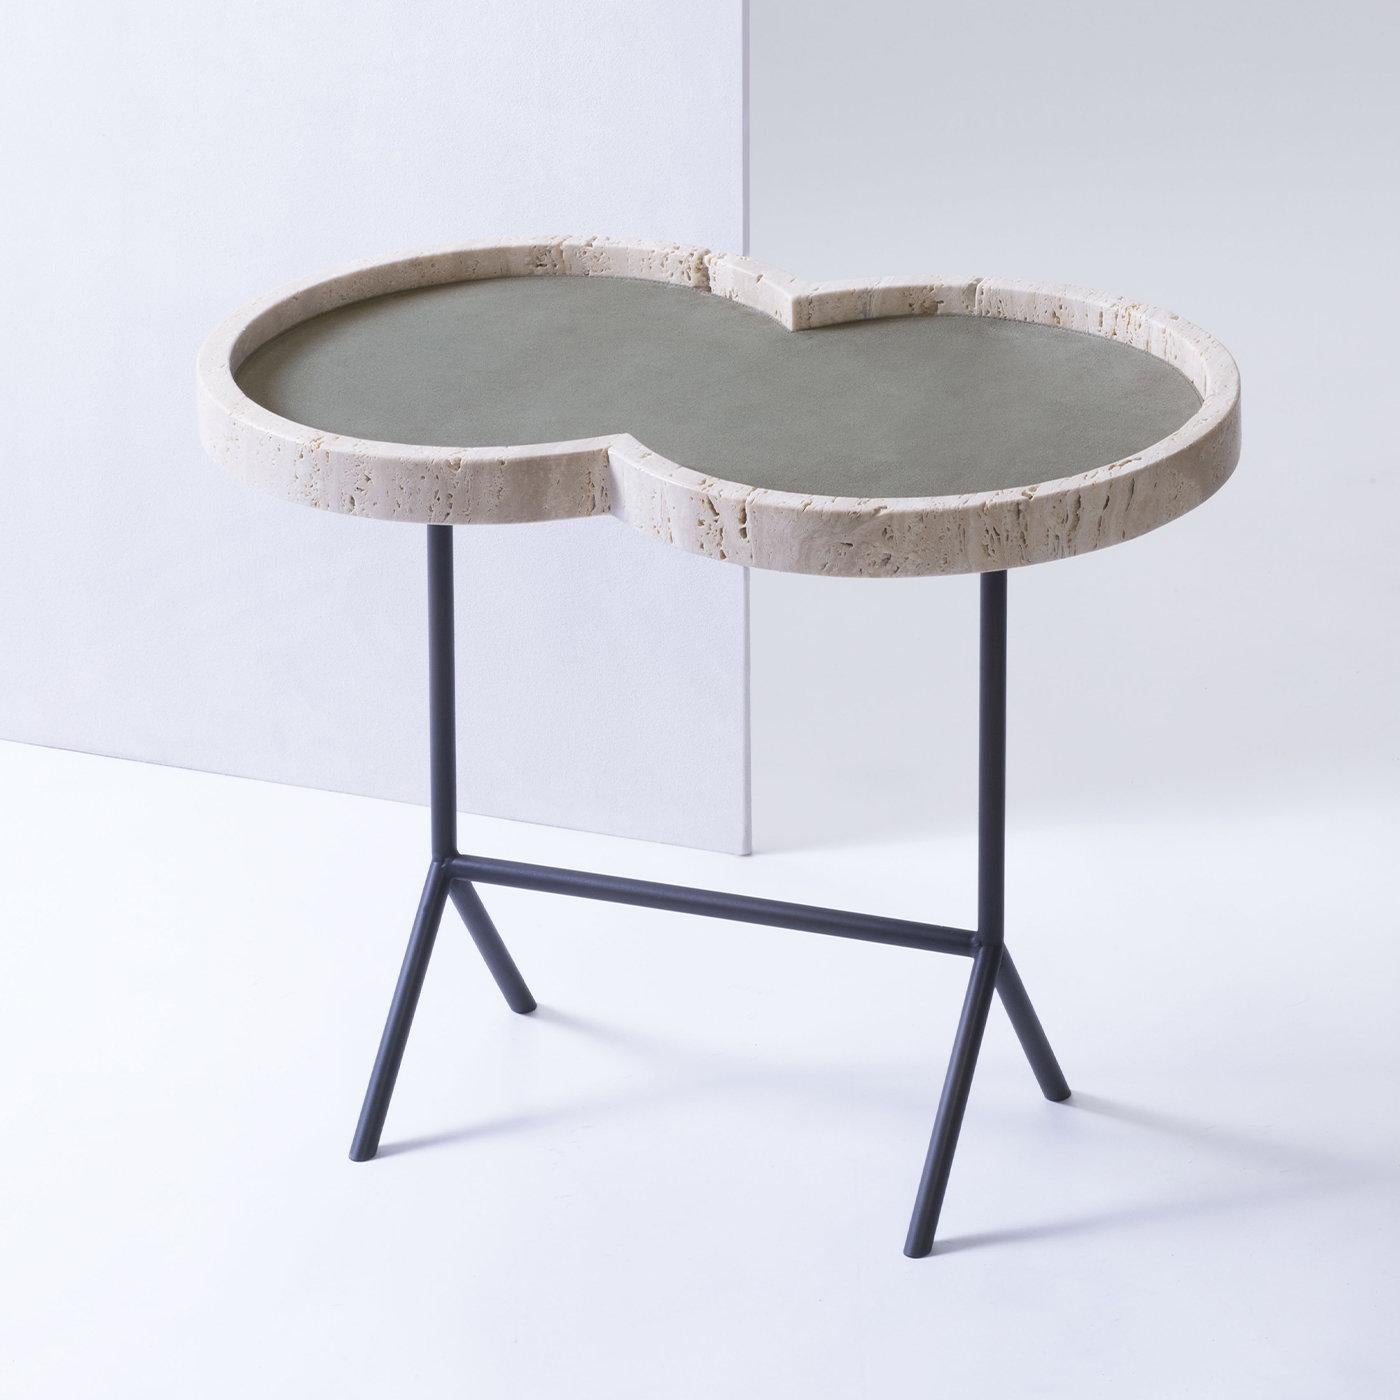 Occasional table with travertine top - Eight by Stephane Parmentier for Giobagnara.
The object presented in the image has following finish: Travertine & A69 Sage Suede Leather (top) and Bronze legs.

Named after the distinctive shape of its top,